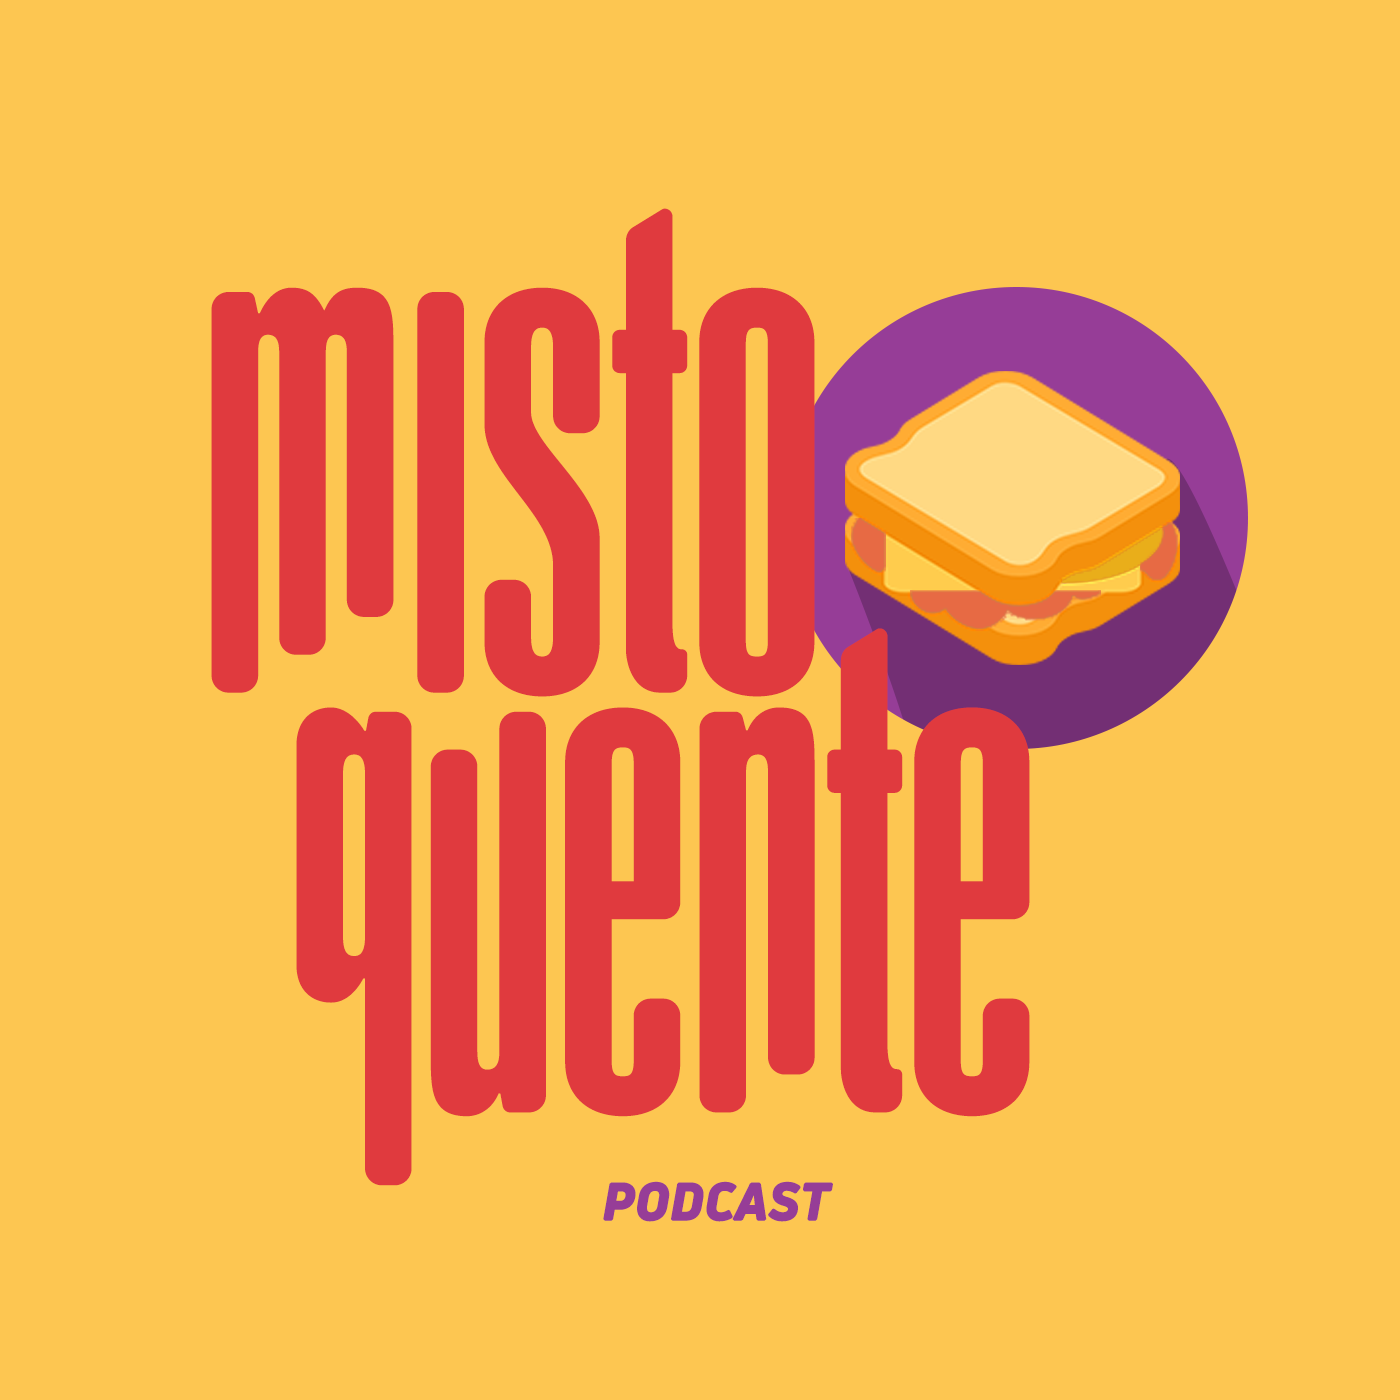 http://www.sec.unicamp.br/wp-content/uploads/2018/07/mistoquentepodcastunicamp14001400.png